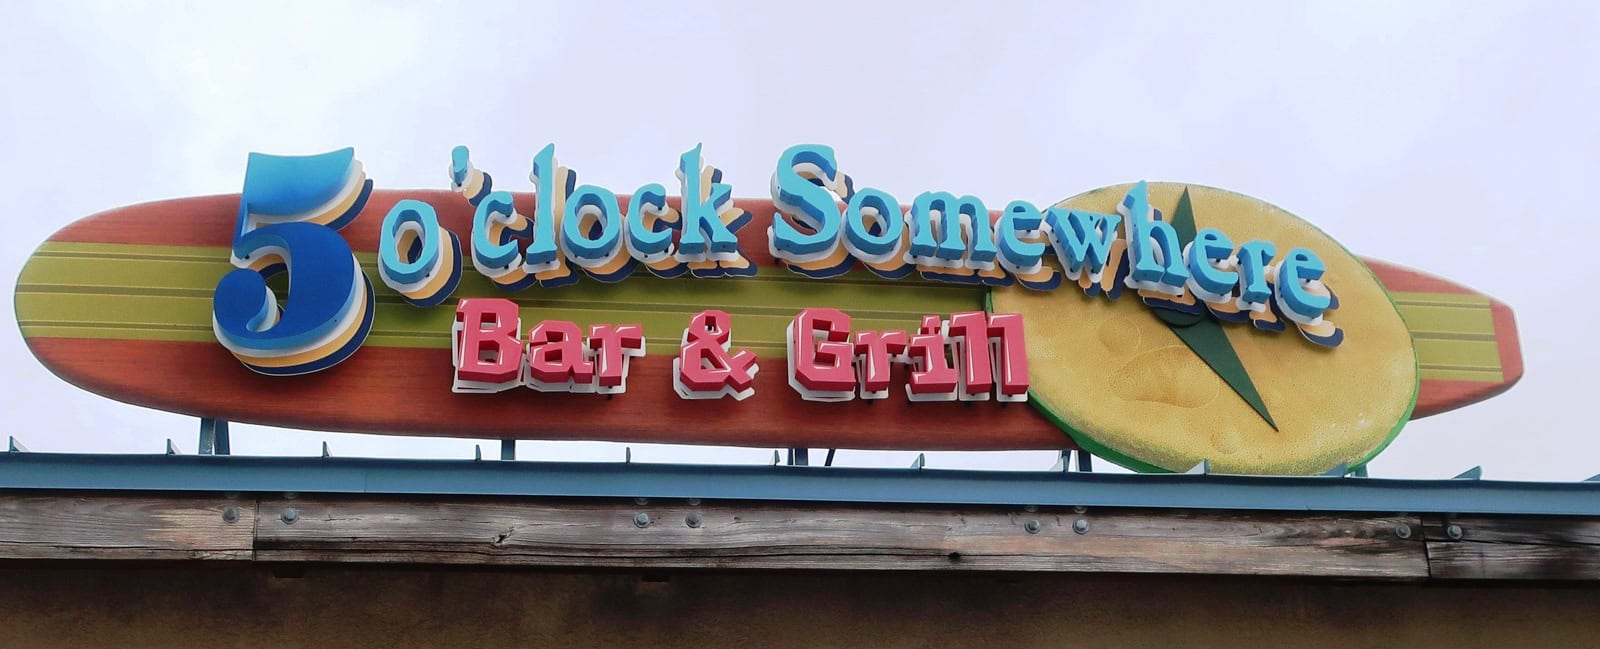 Broward County Florida The iconic It’s 5 0’Clock Somewhere Bar reflects the philosophy of one of Florida’s favorite sons – Jimmy Buffett.